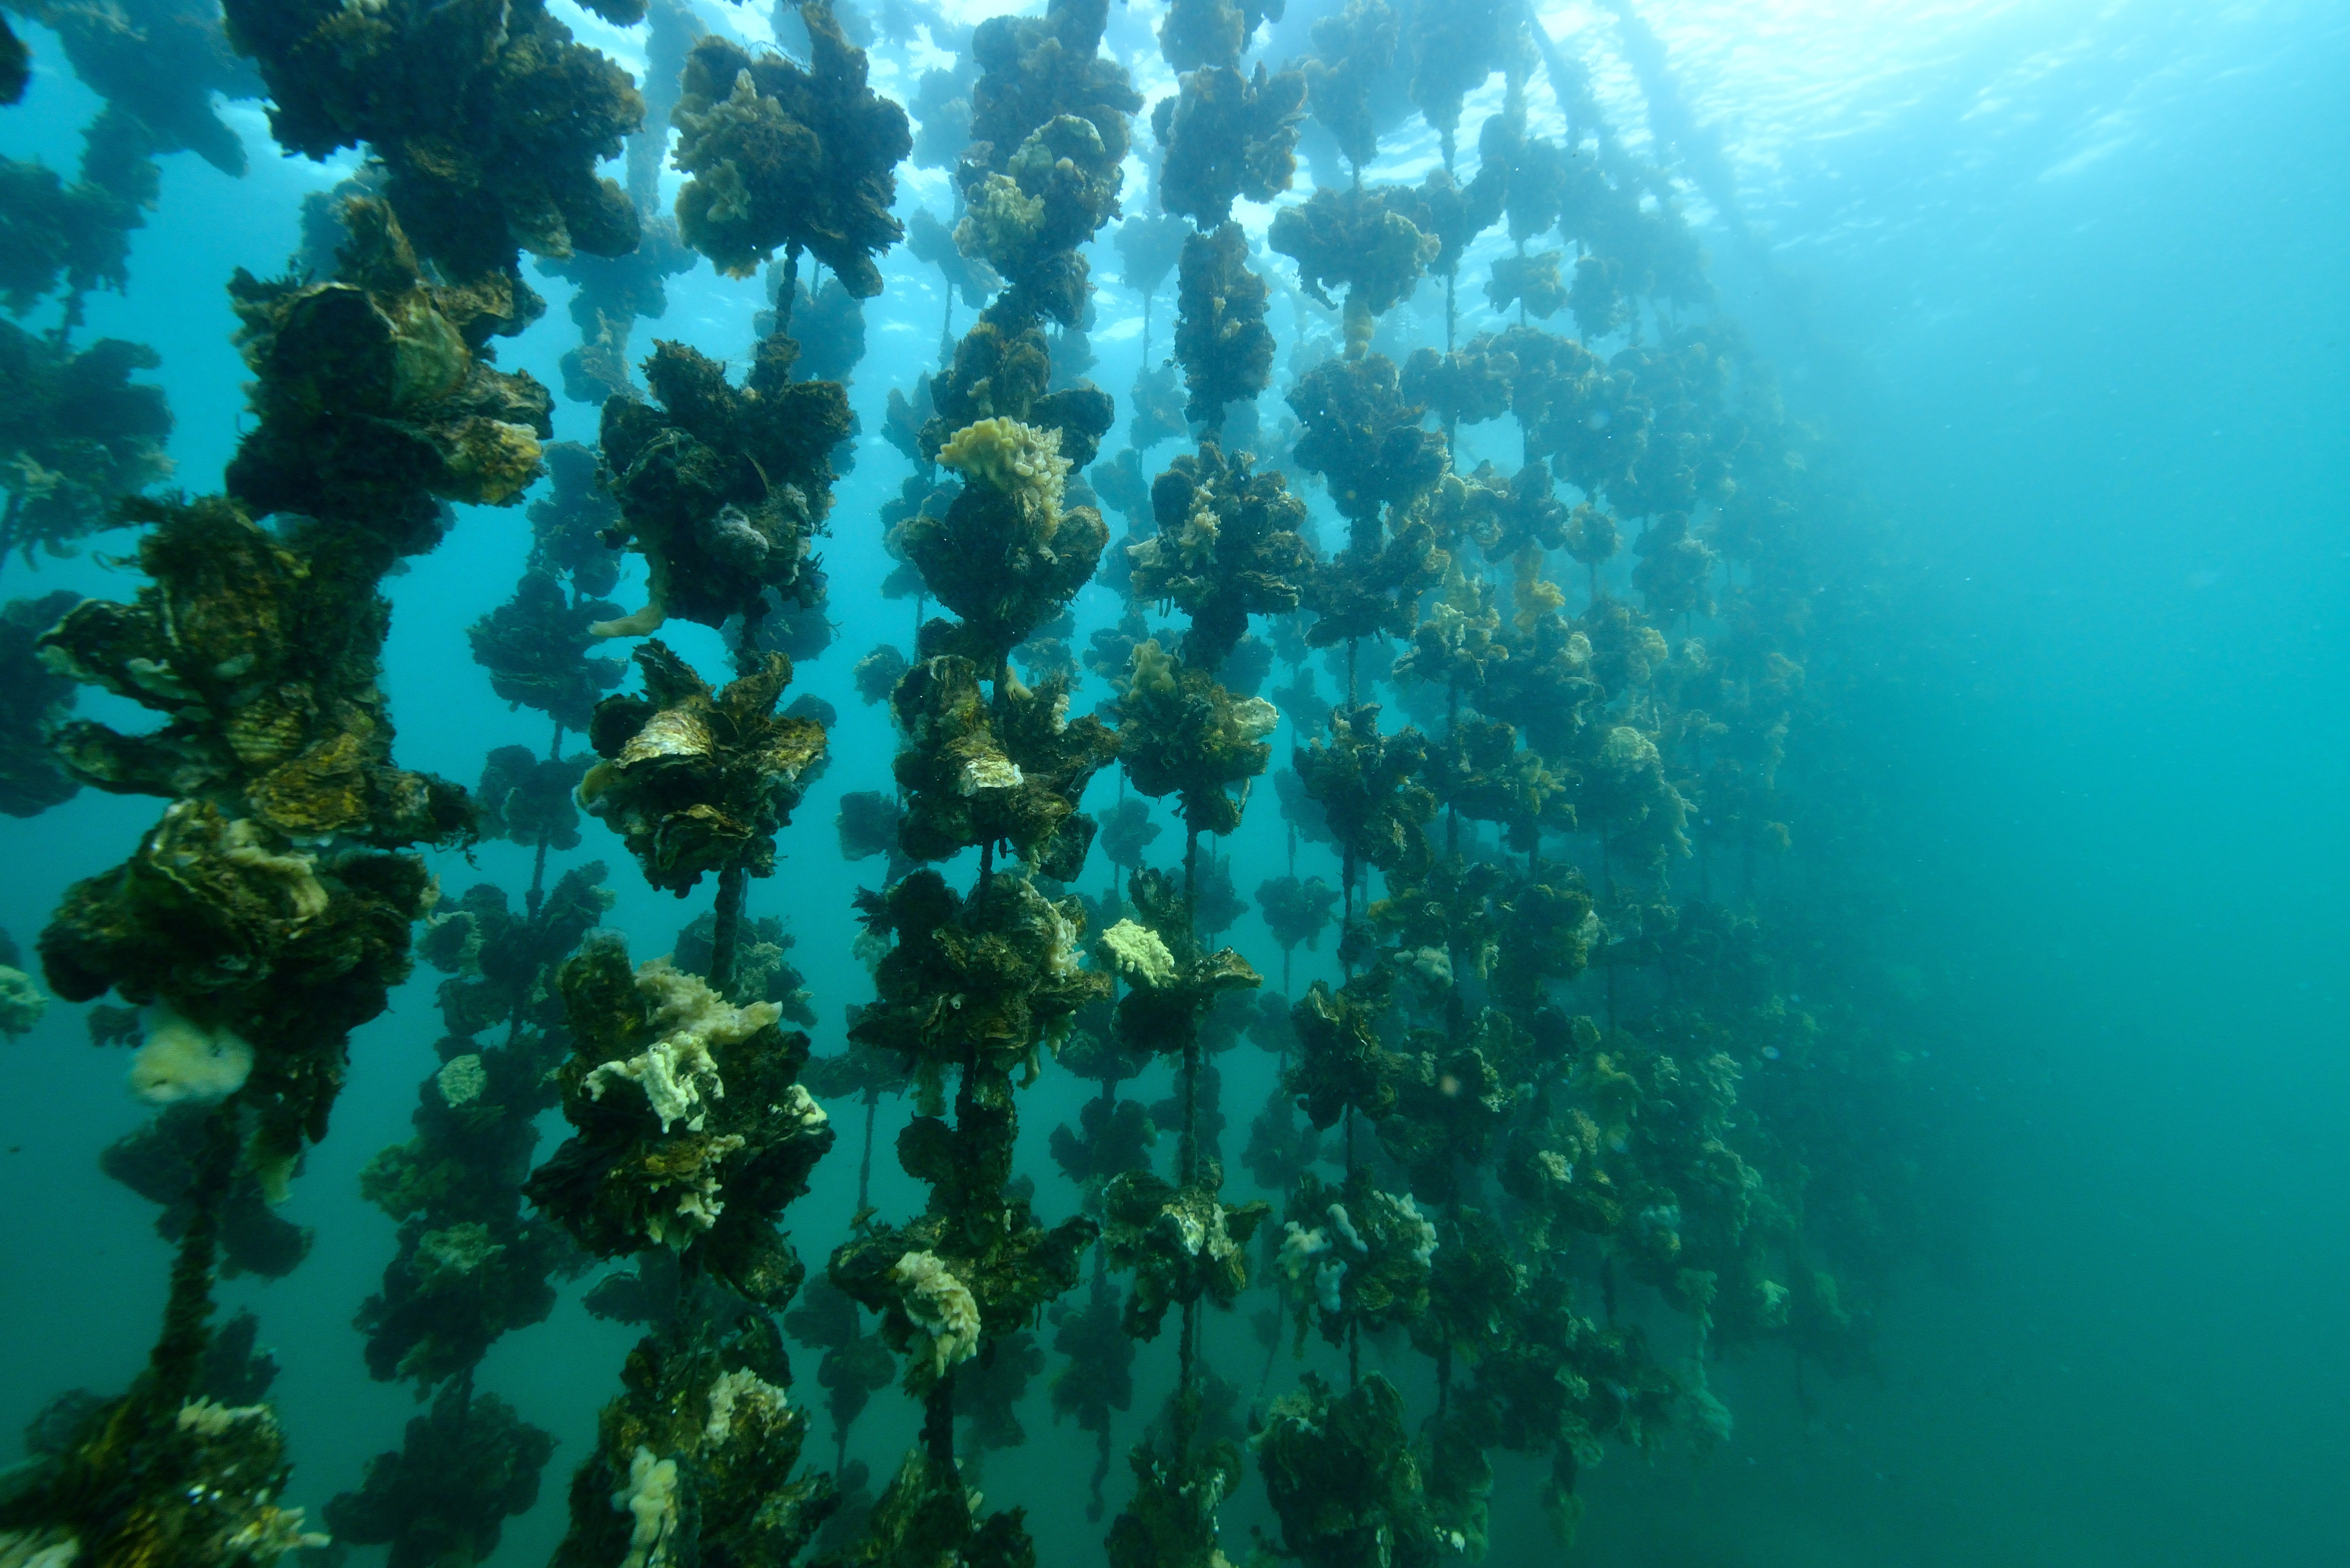 oysters grown on ropes underwater